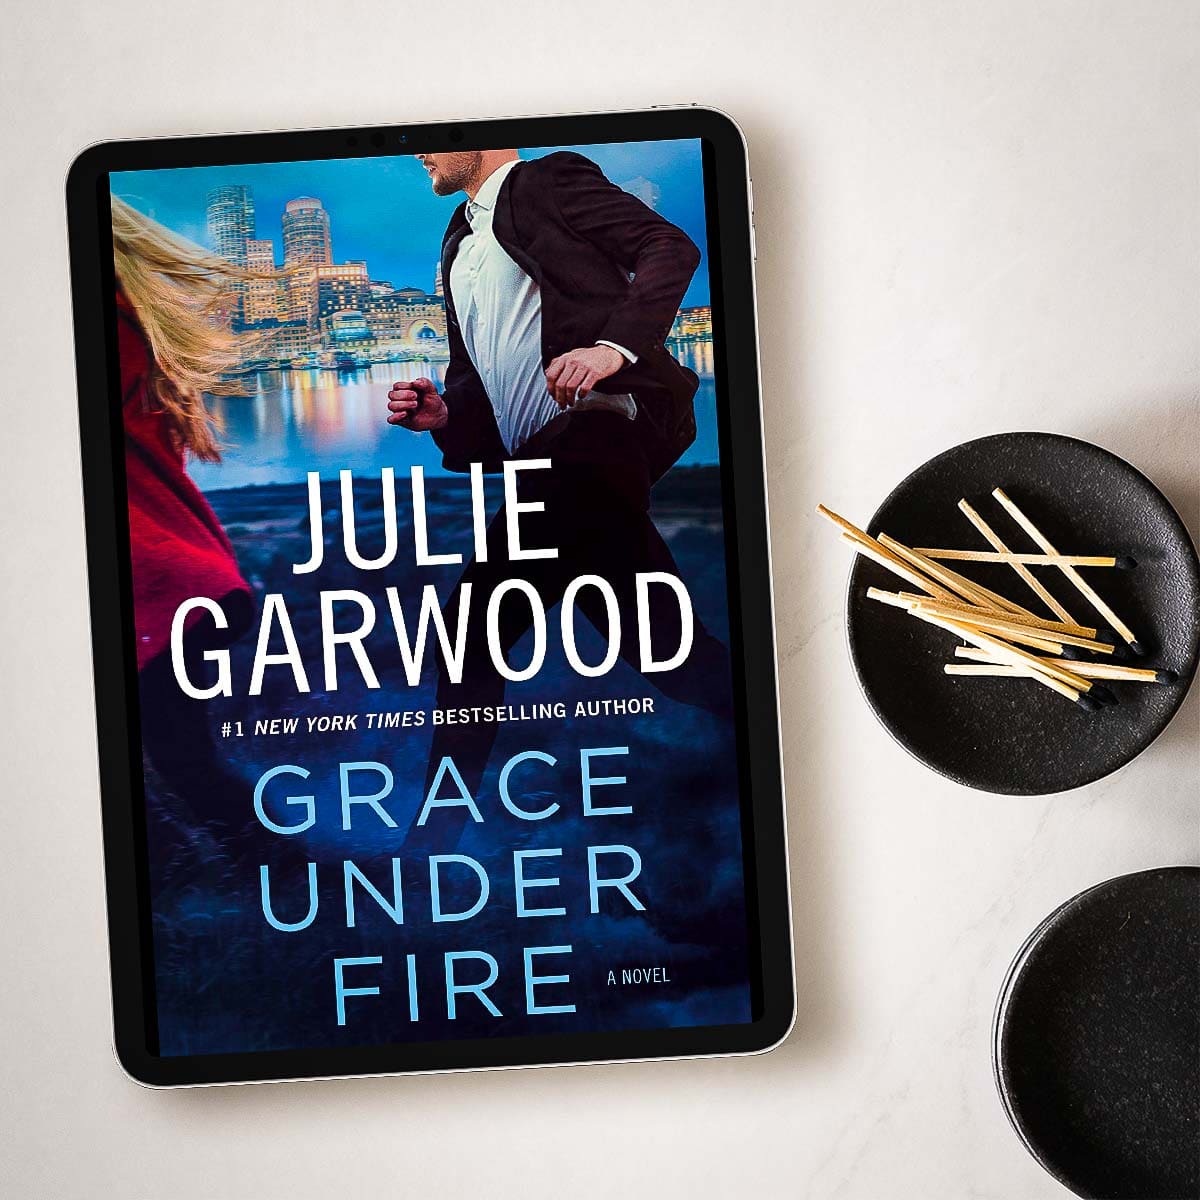 Enjoy this excerpt from GRACE UNDER FIRE by Julie Garwood, a romantic suspense and the 14th book in the Buchanan-Renard series. Be sure to grab a copy!